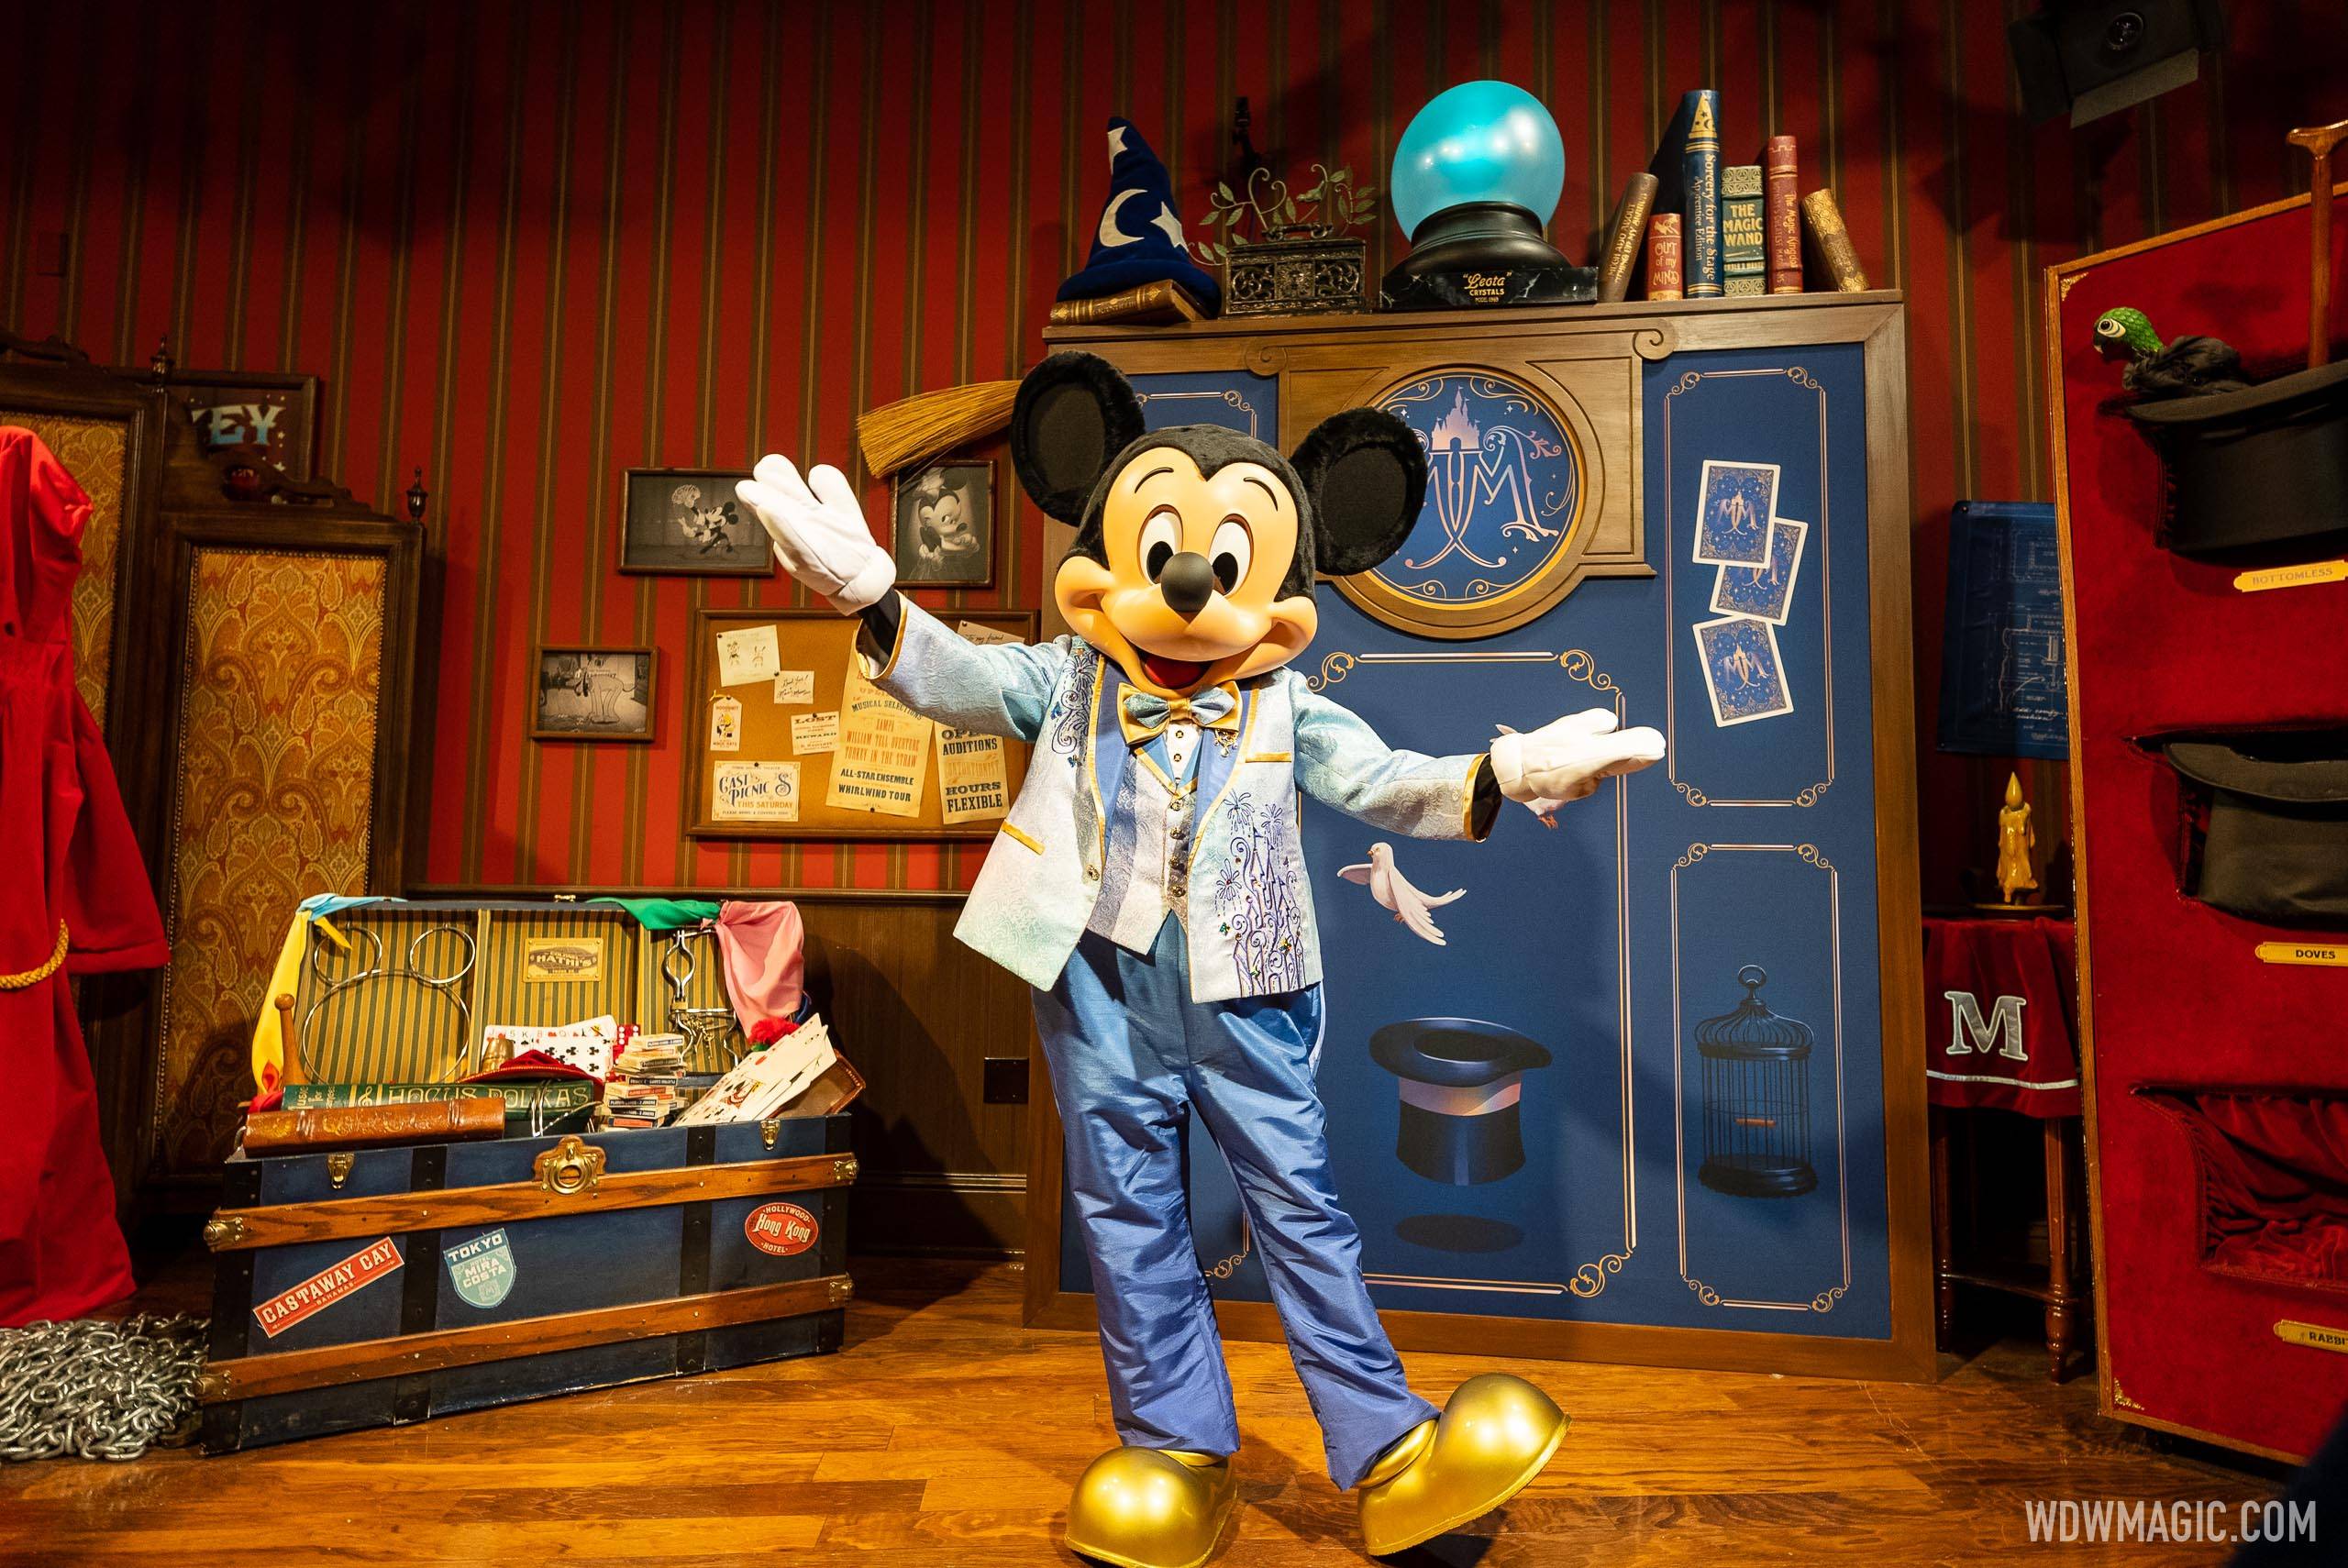 Indoor meet and greets return to Walt Disney World with Mickey Mouse now appearing at Town Square Theater in Magic Kingdom